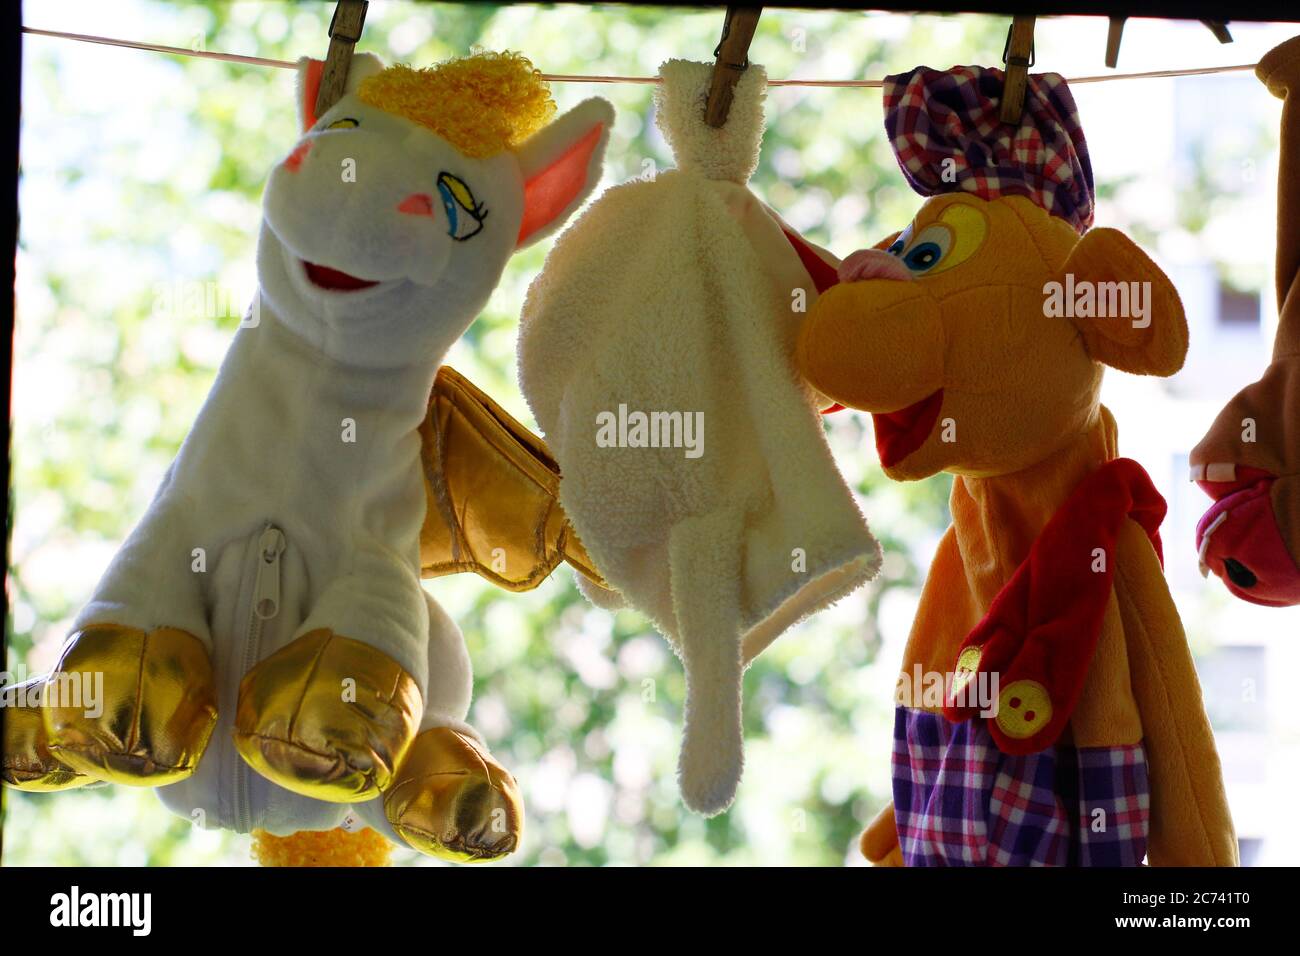 Children's toys are dried on clothespins. Soft toys hang on a clothesline, toys are fixed with clothespins. Stock Photo